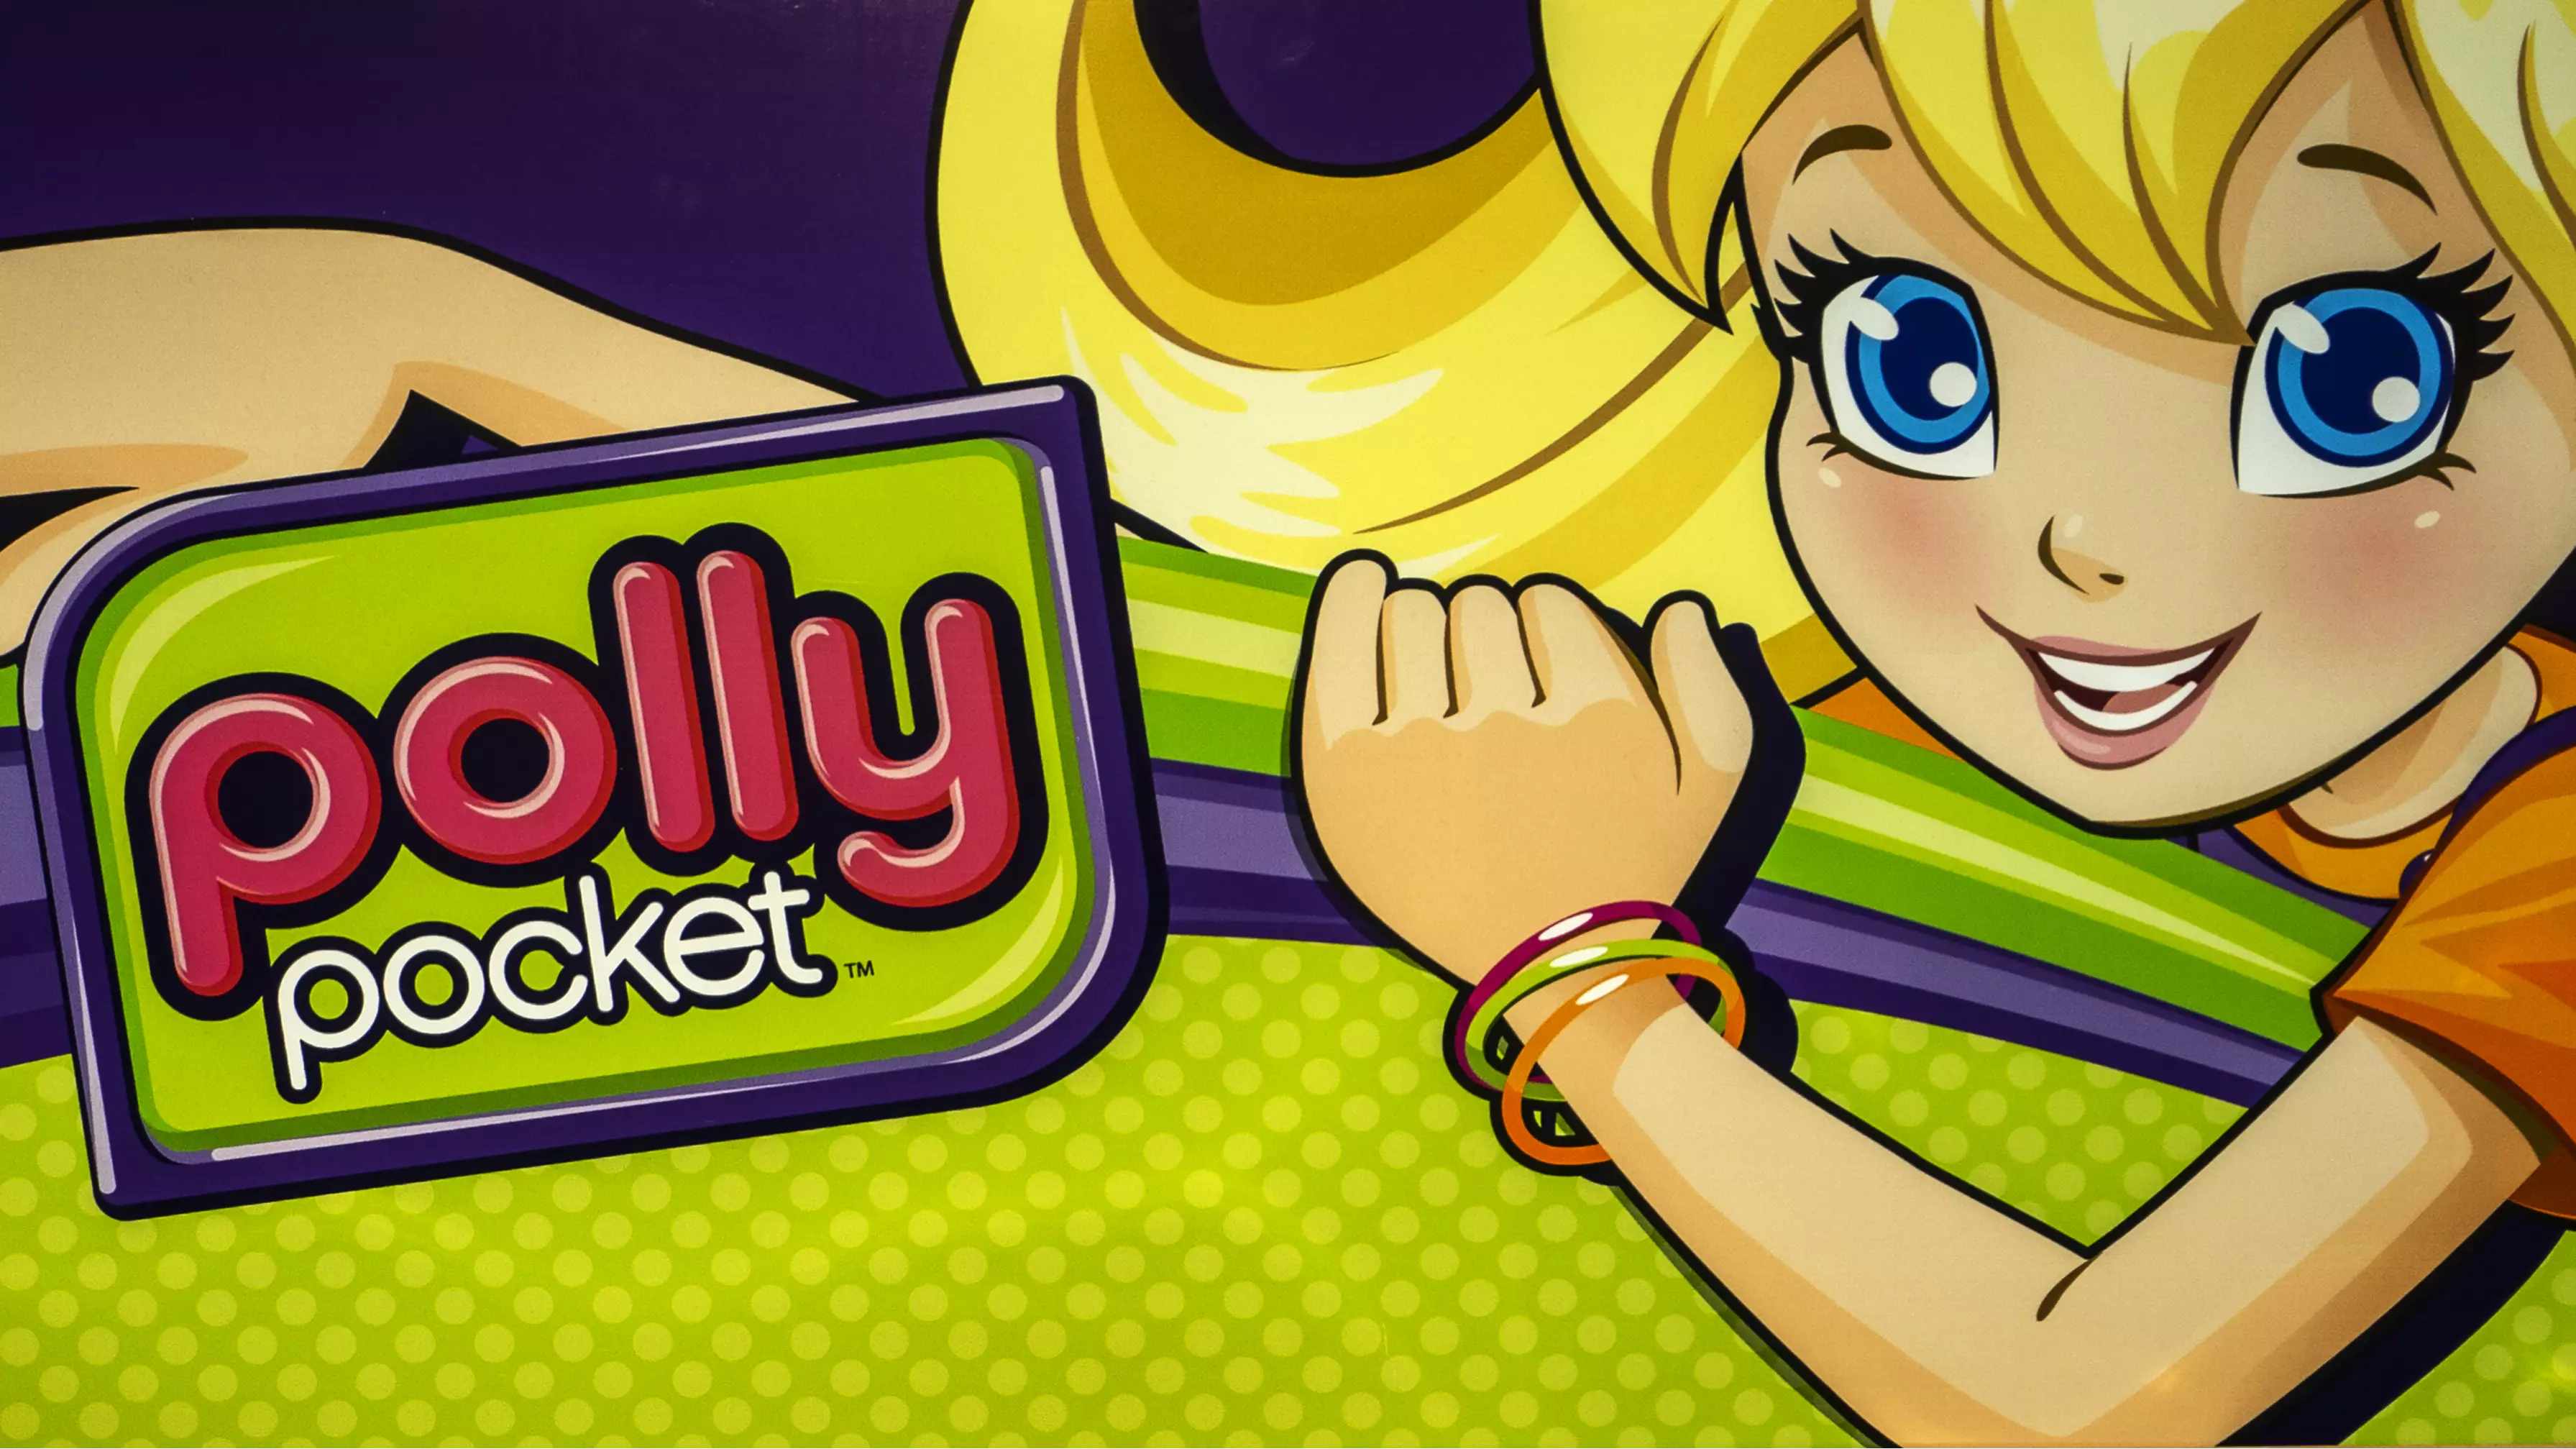 Polly Pocket Is Getting A Live-Action Movie Starring Lily Collins